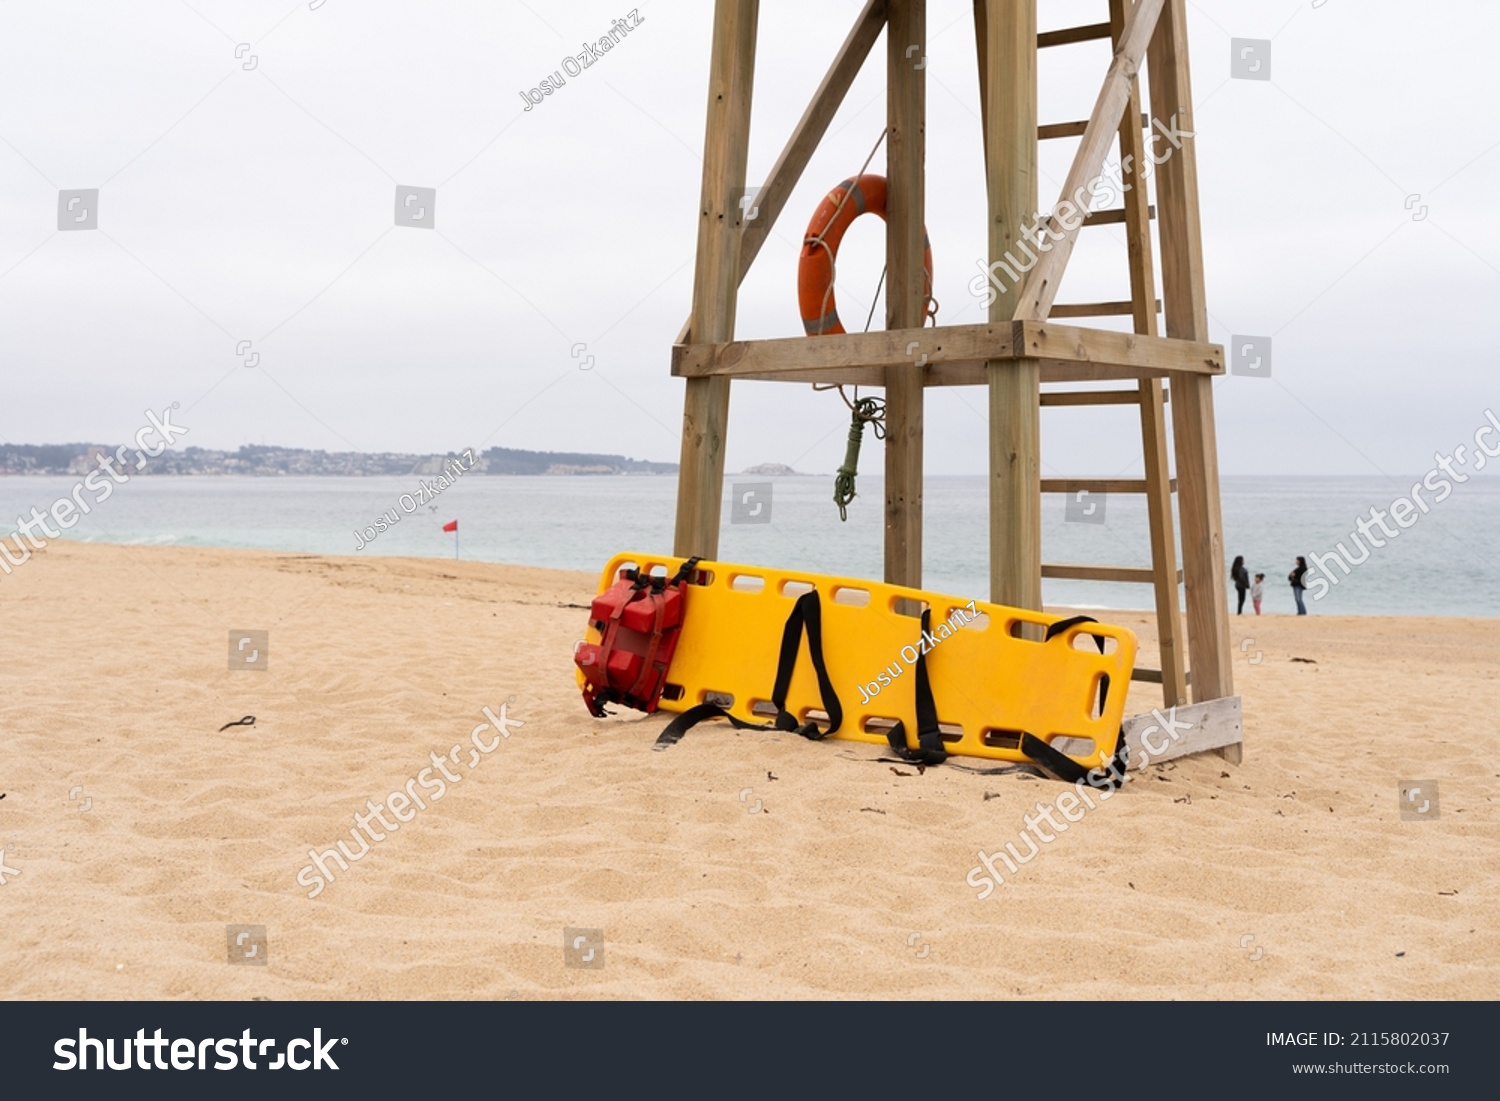 Yellow medical backboard leaning on wooden lifeguard tower on cloudy day in Algarrobo beach, Chile #2115802037